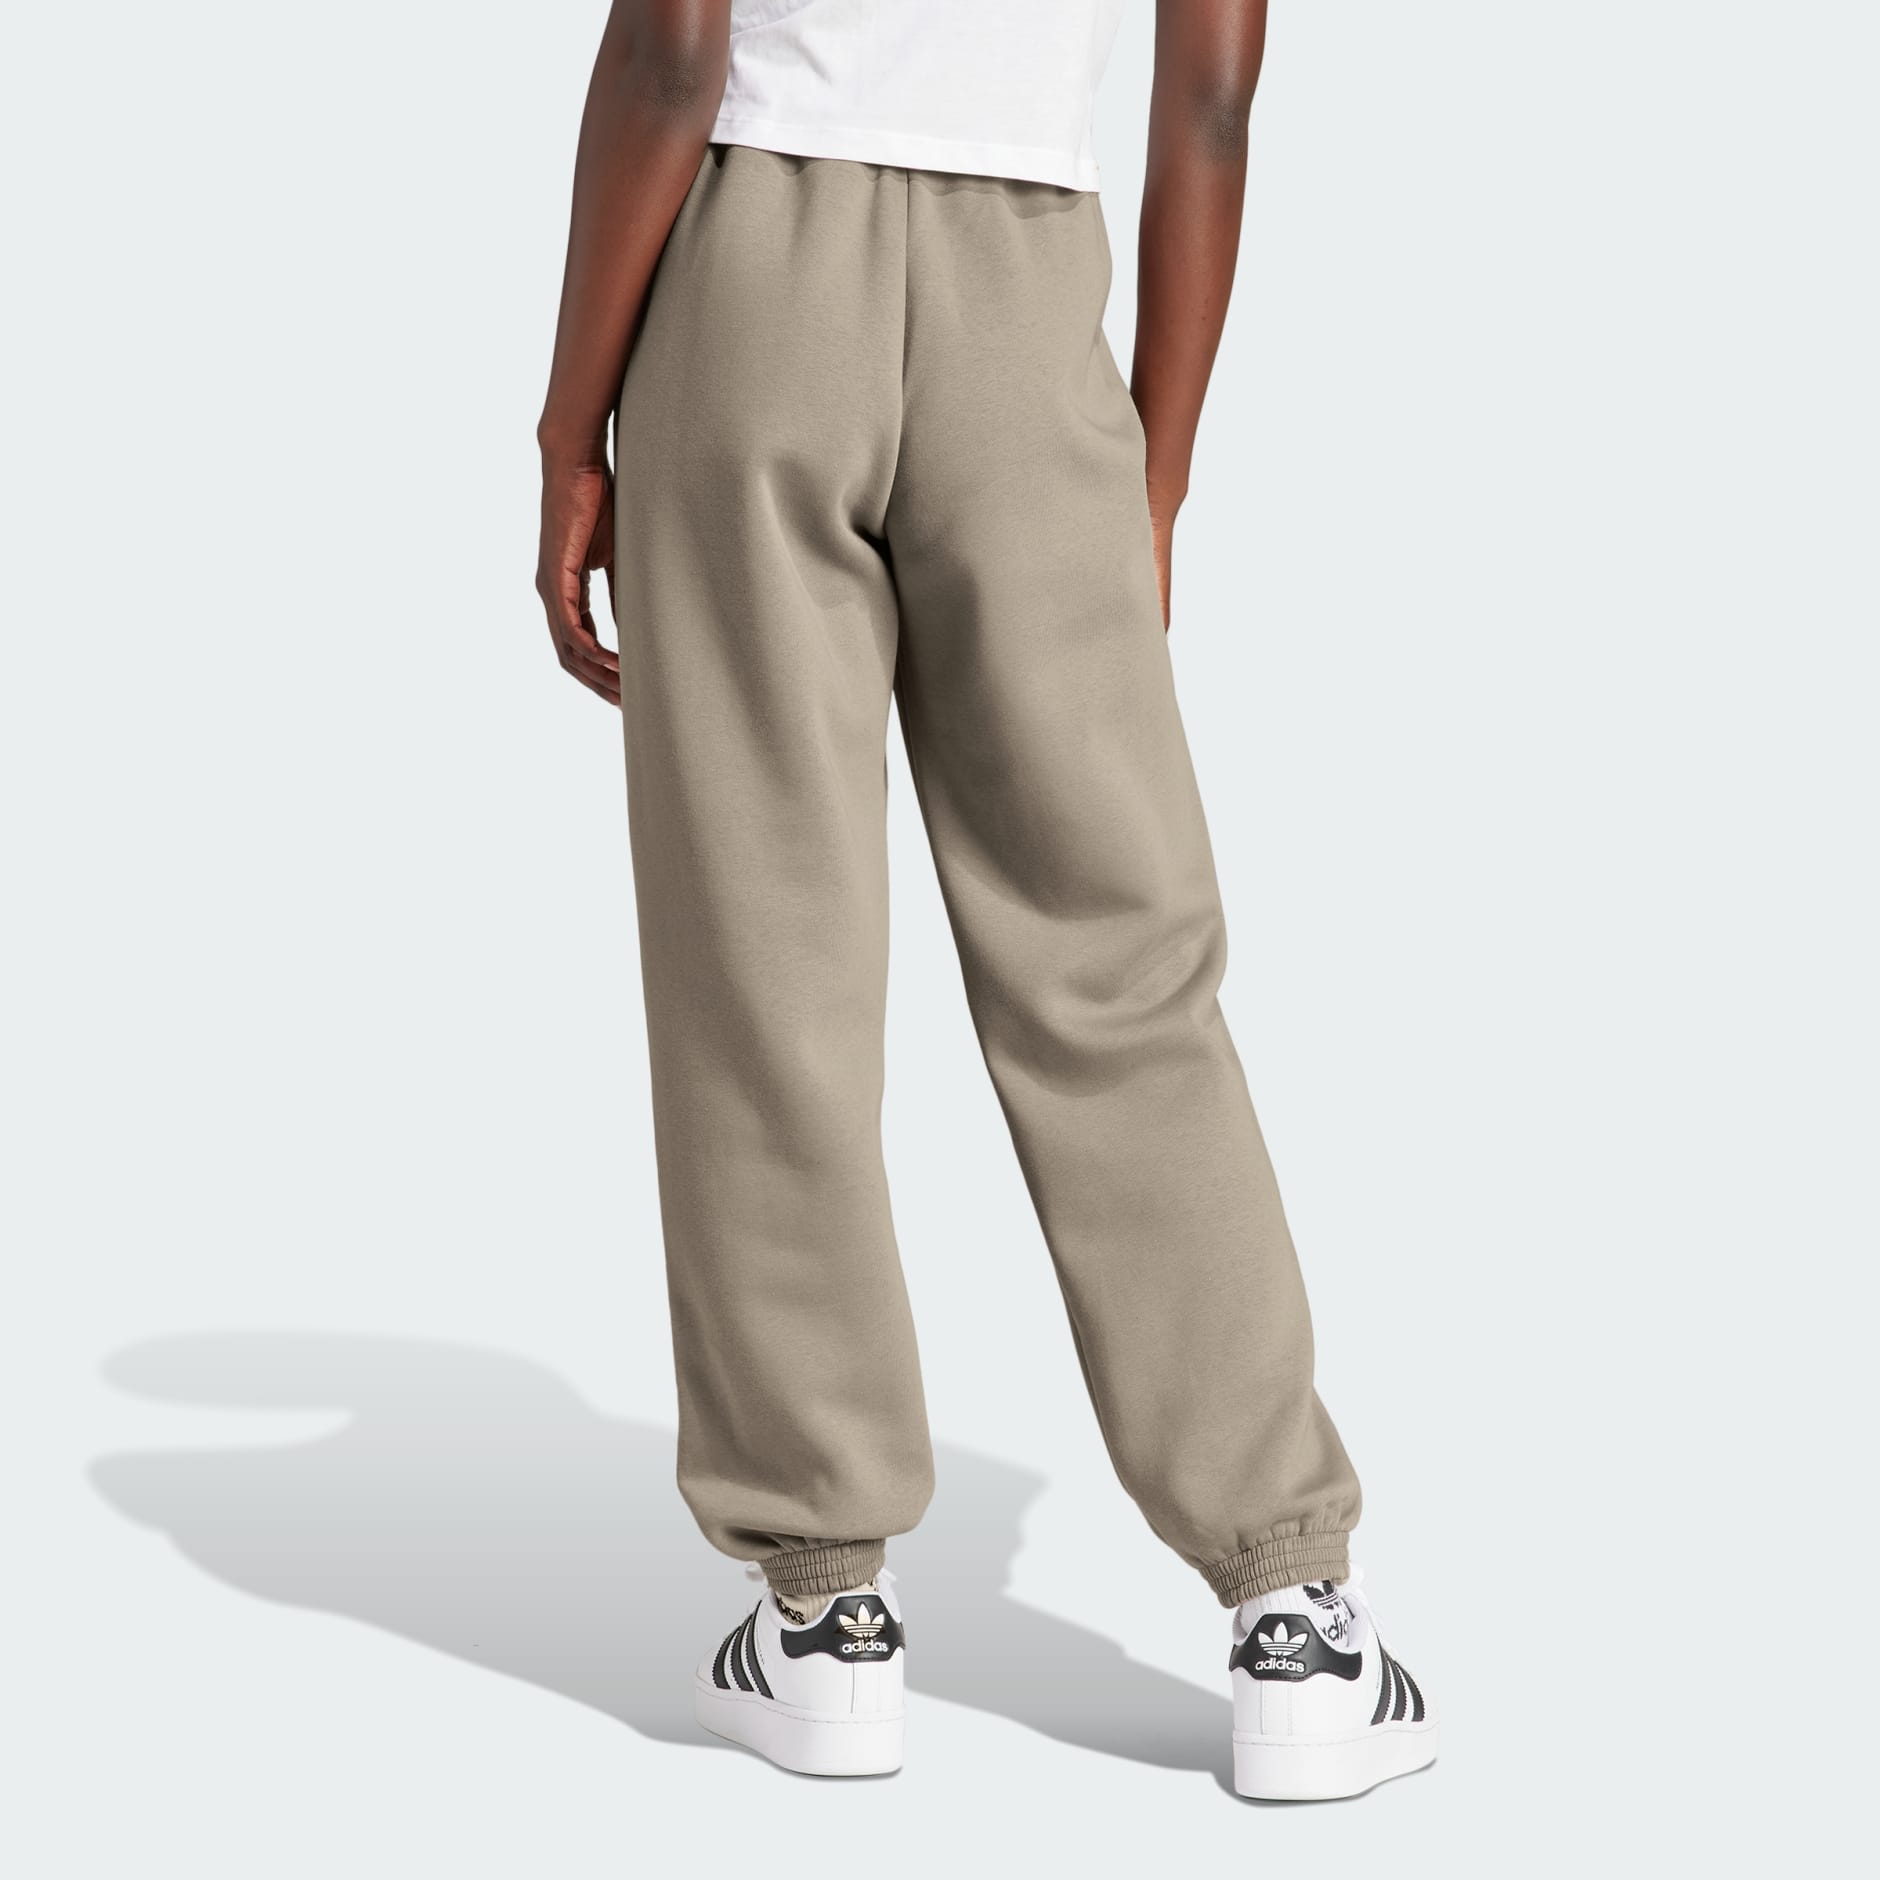 Women's Clothing - Holiday Sweat Pants (Gender Neutral) - Brown